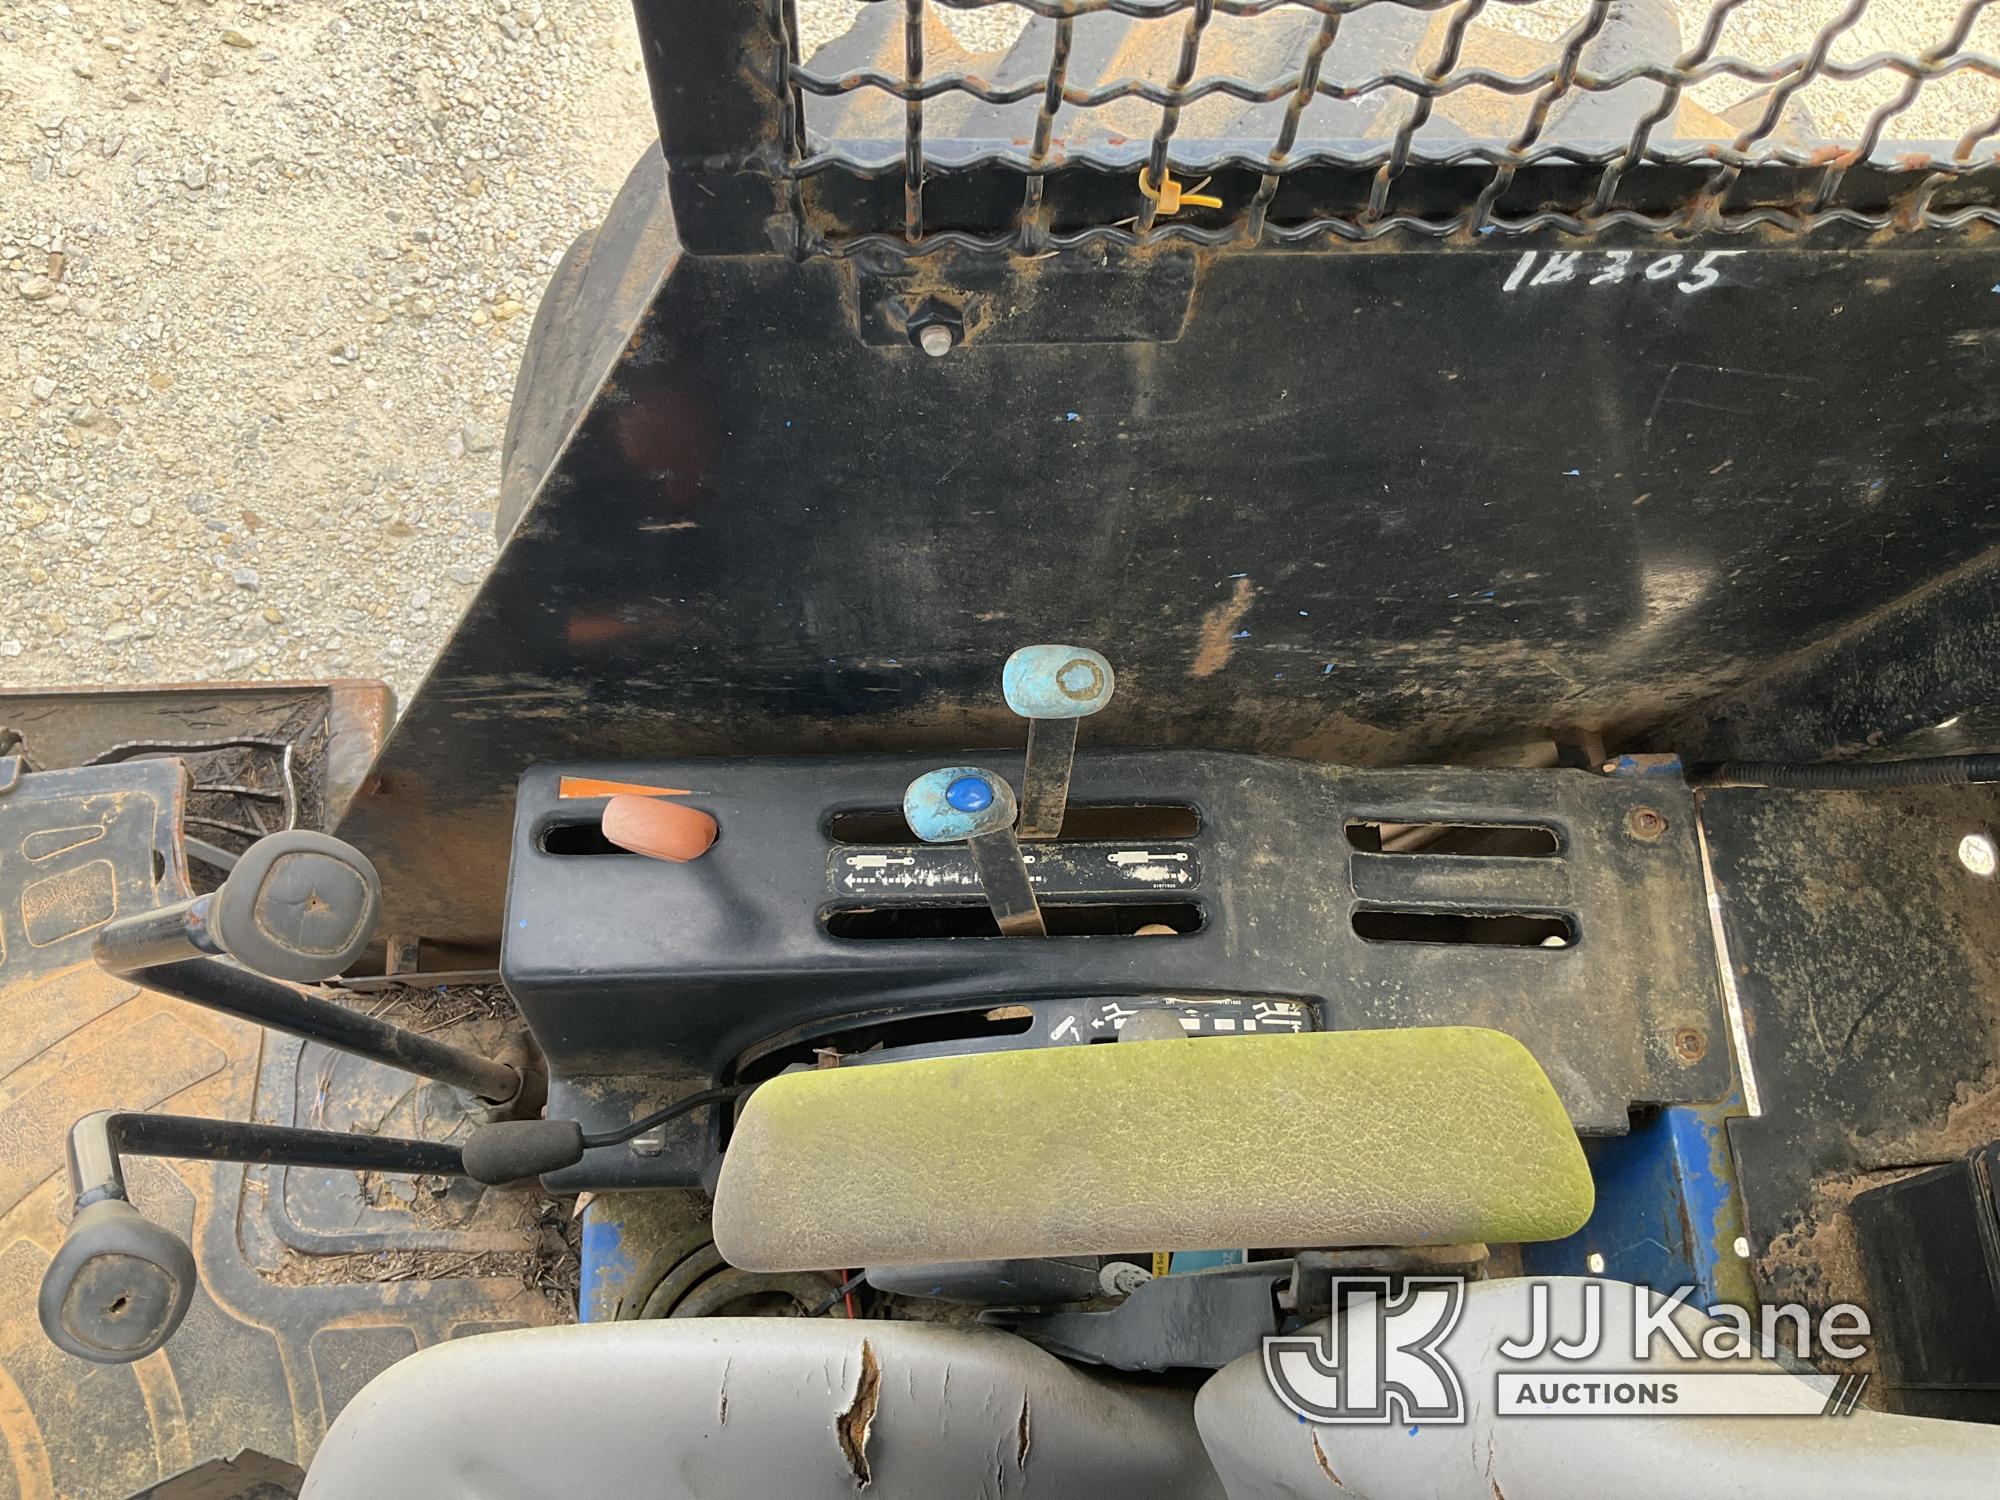 (Villa Rica, GA) 2011 New Holland TS6030 4x4 Rubber Tired Tractor Not Running, Condition Unknown, No